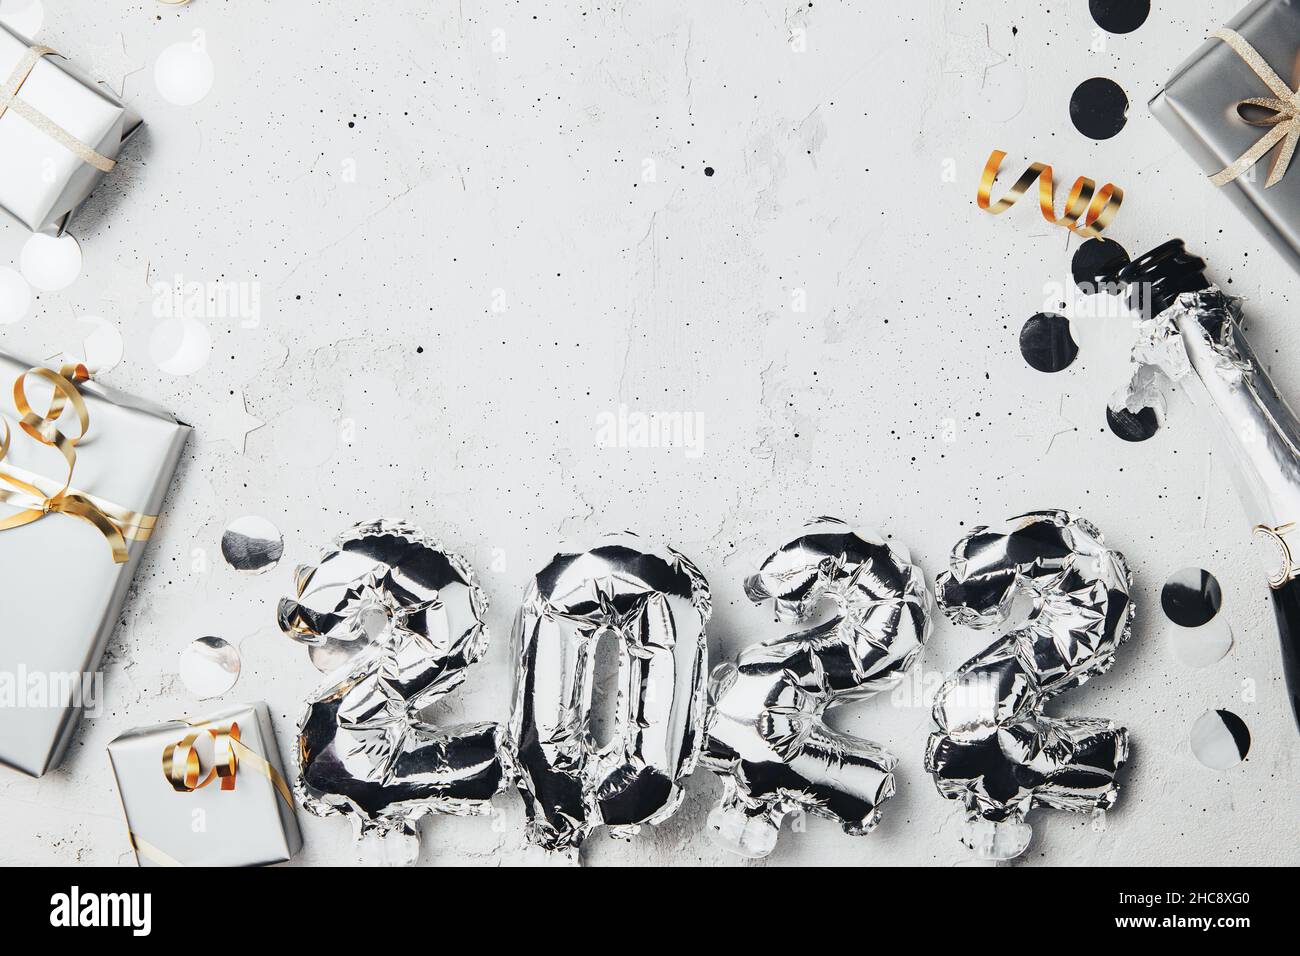 New Year 2022 gray background flat lay. Top view on 2022 balloon silver metallic numbers with confetti, grey gift boxes. Invitation or greeting card concept. Festive mood. Bottle of champagne bottle Stock Photo